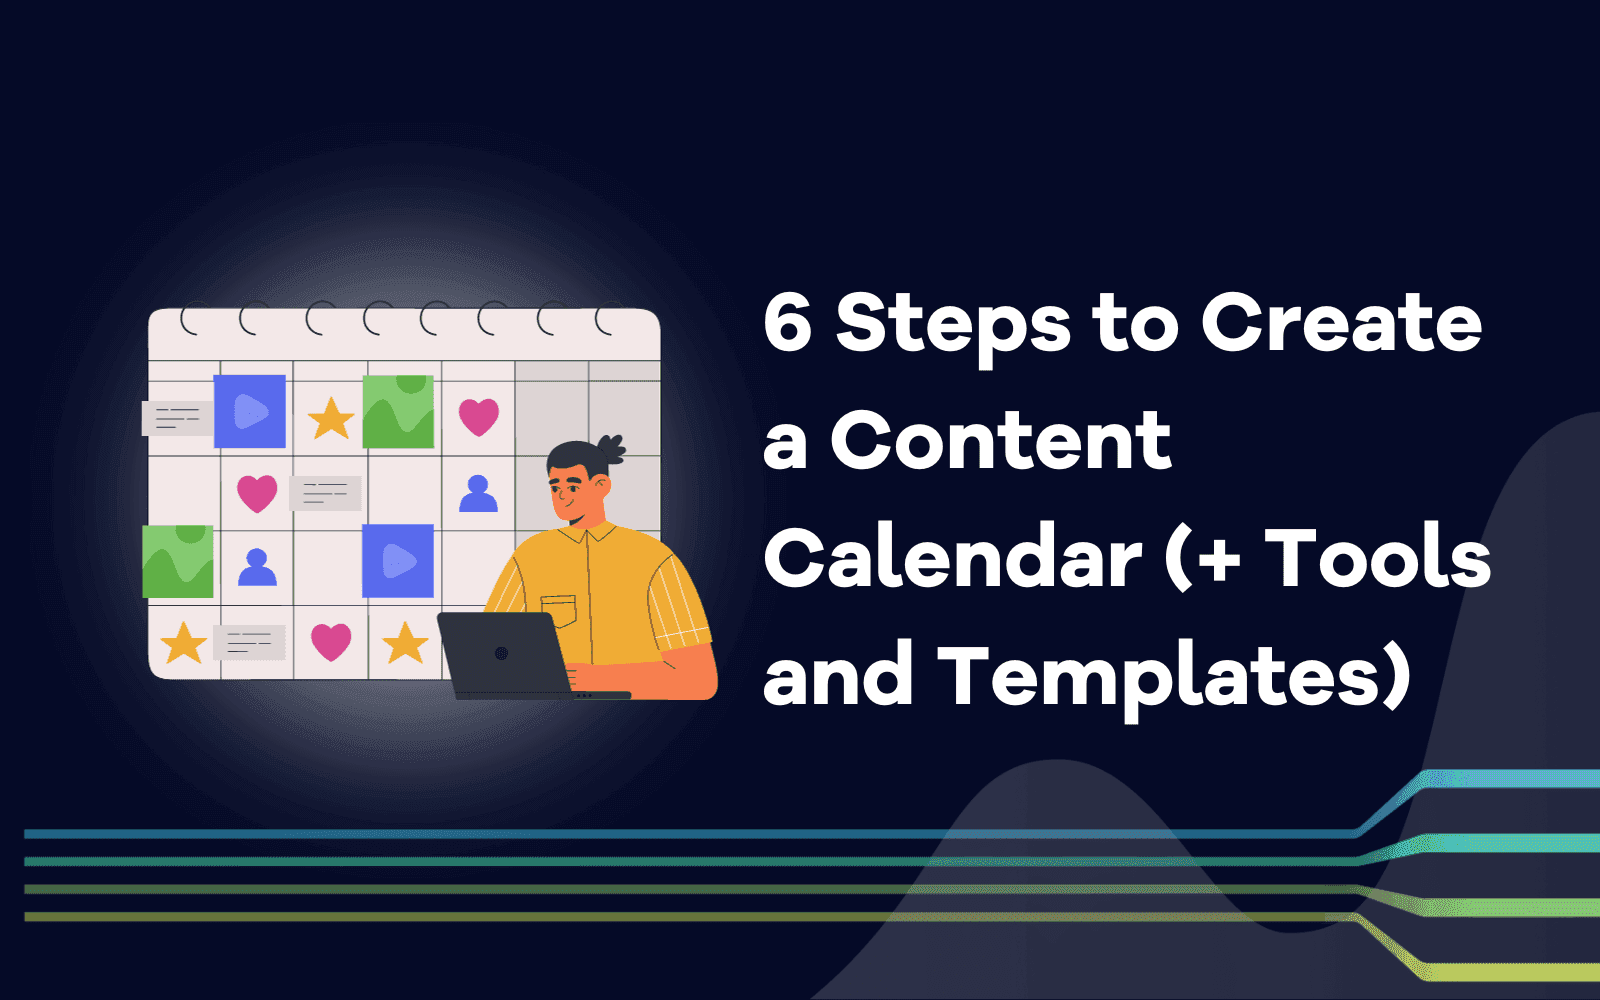 Steps to Create a Content Calendar (Tools and Templates)